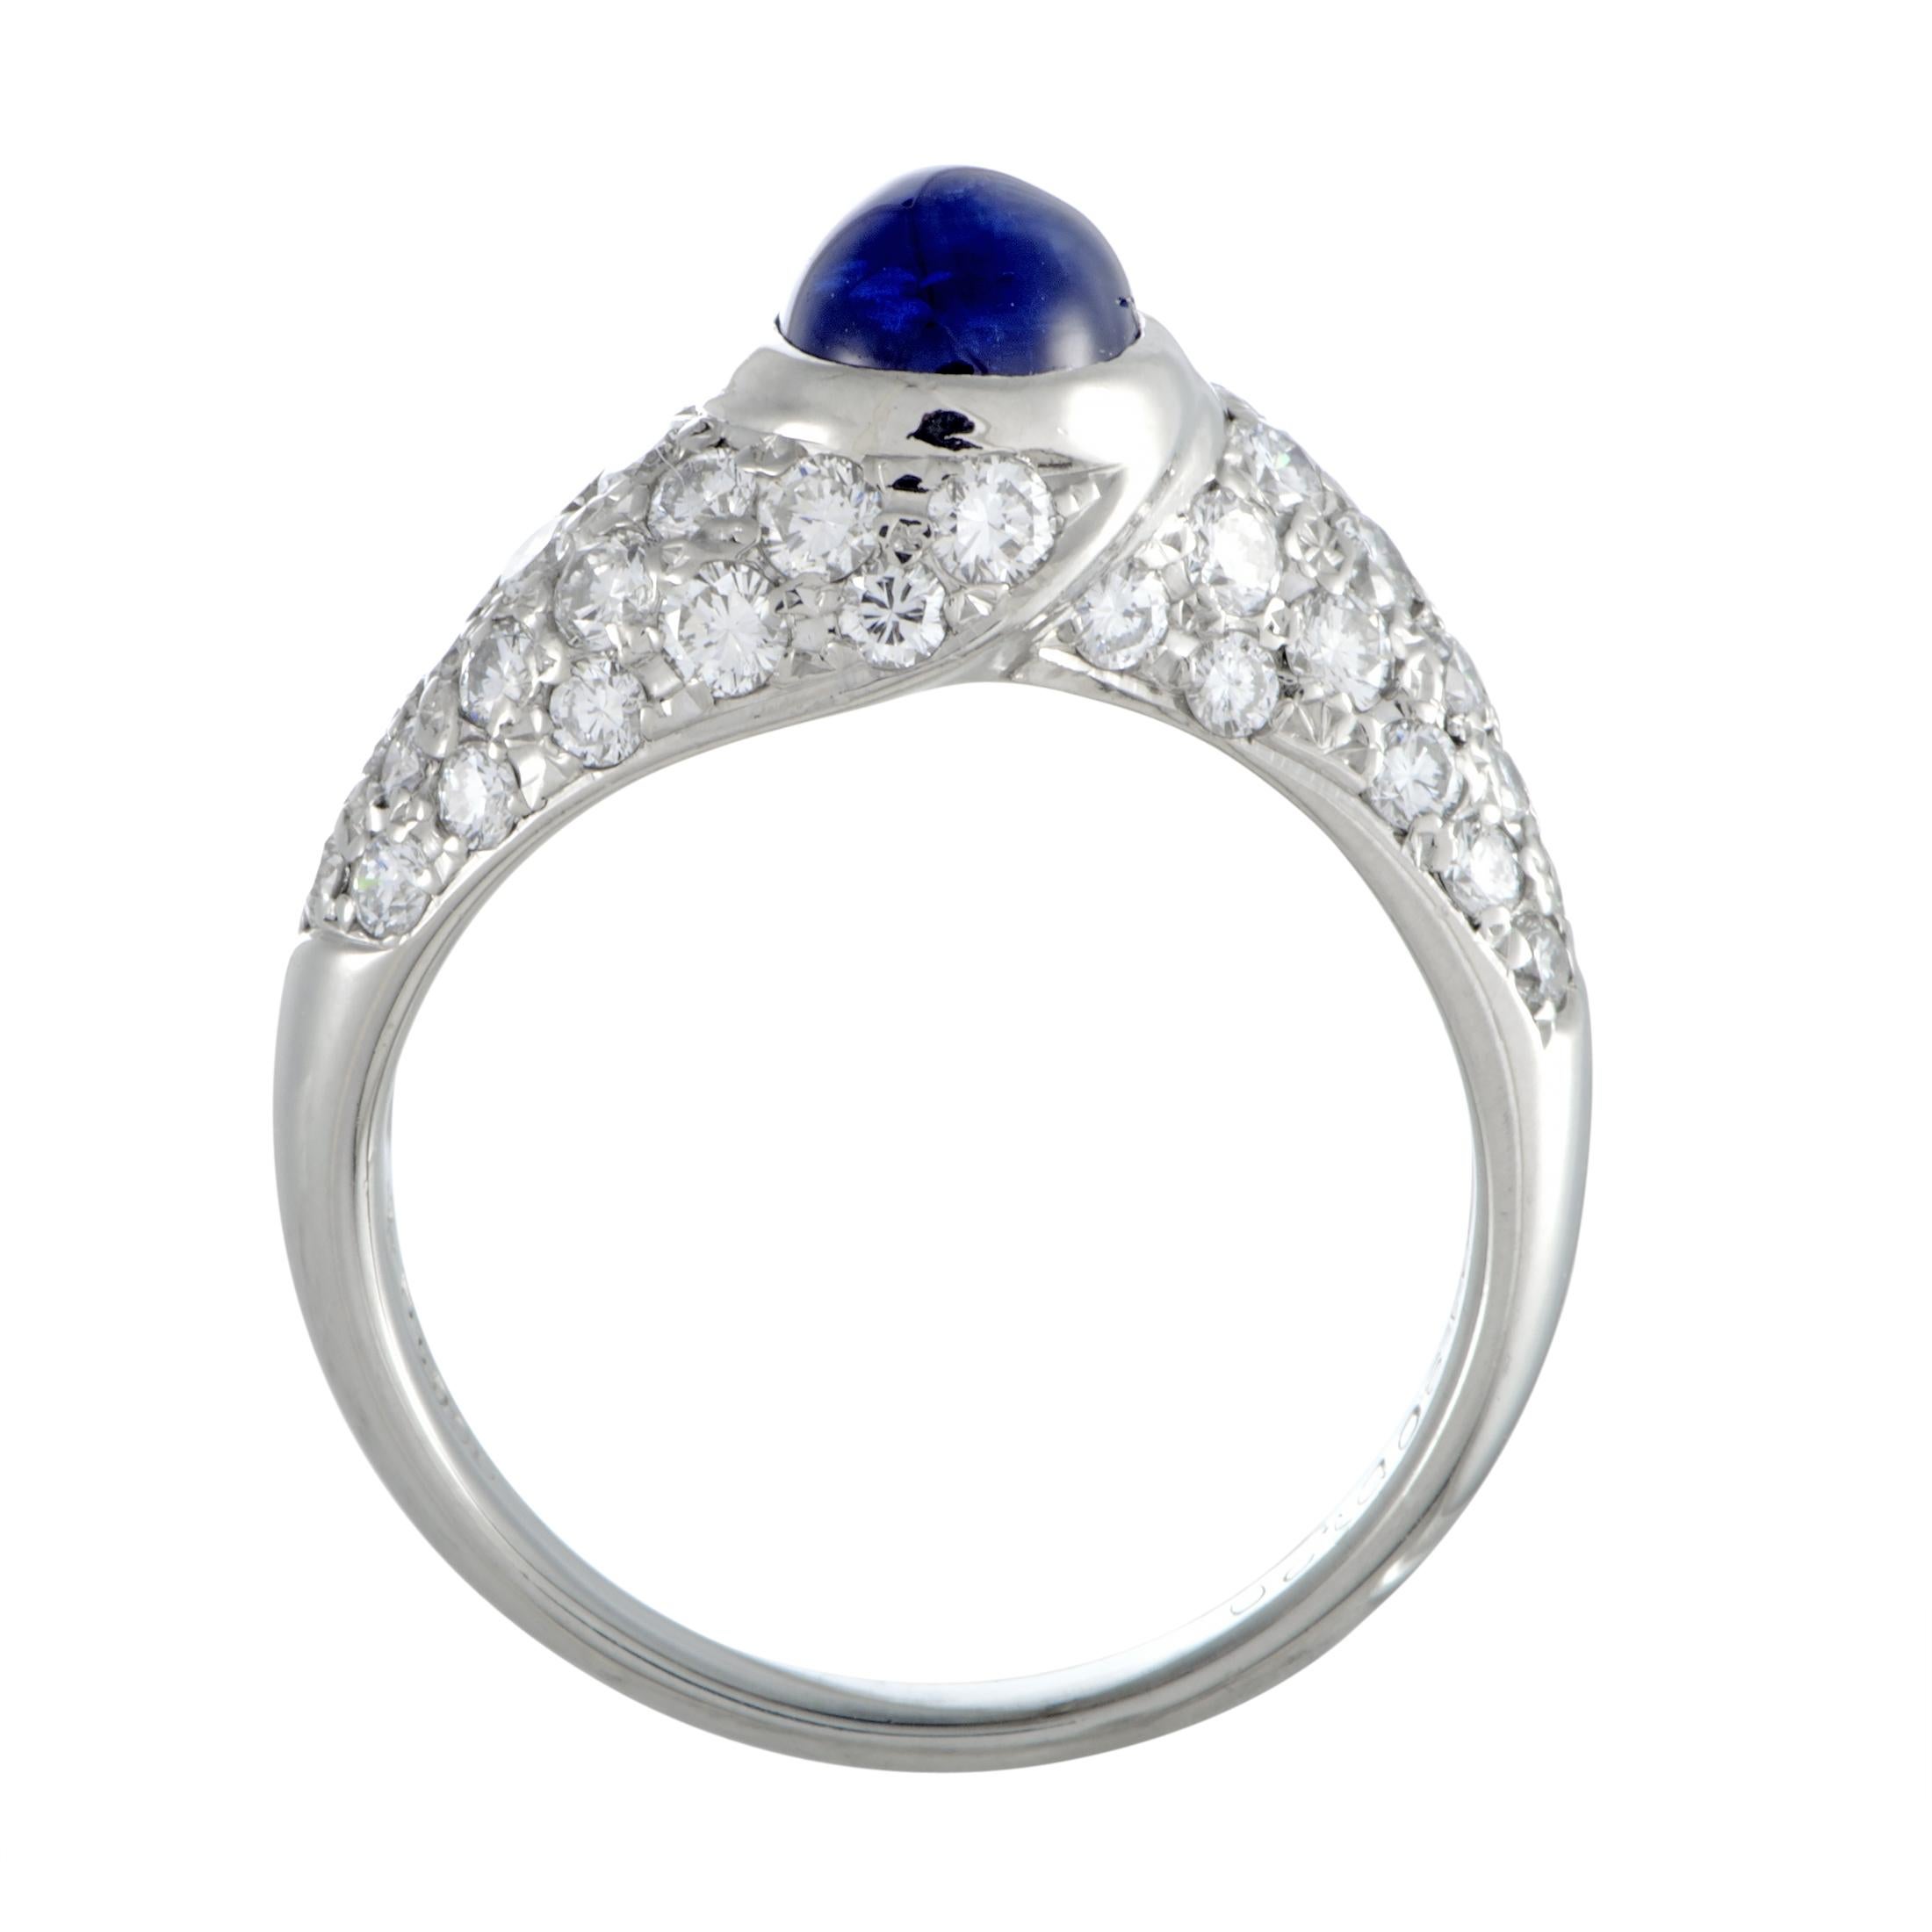 Featuring an exceptionally elegant design that is presented in luxurious platinum and topped off with resplendent gems, this beautiful ring offers a splendidly refined look. The ring is expertly set with a striking sapphire that weighs 1.80 carats